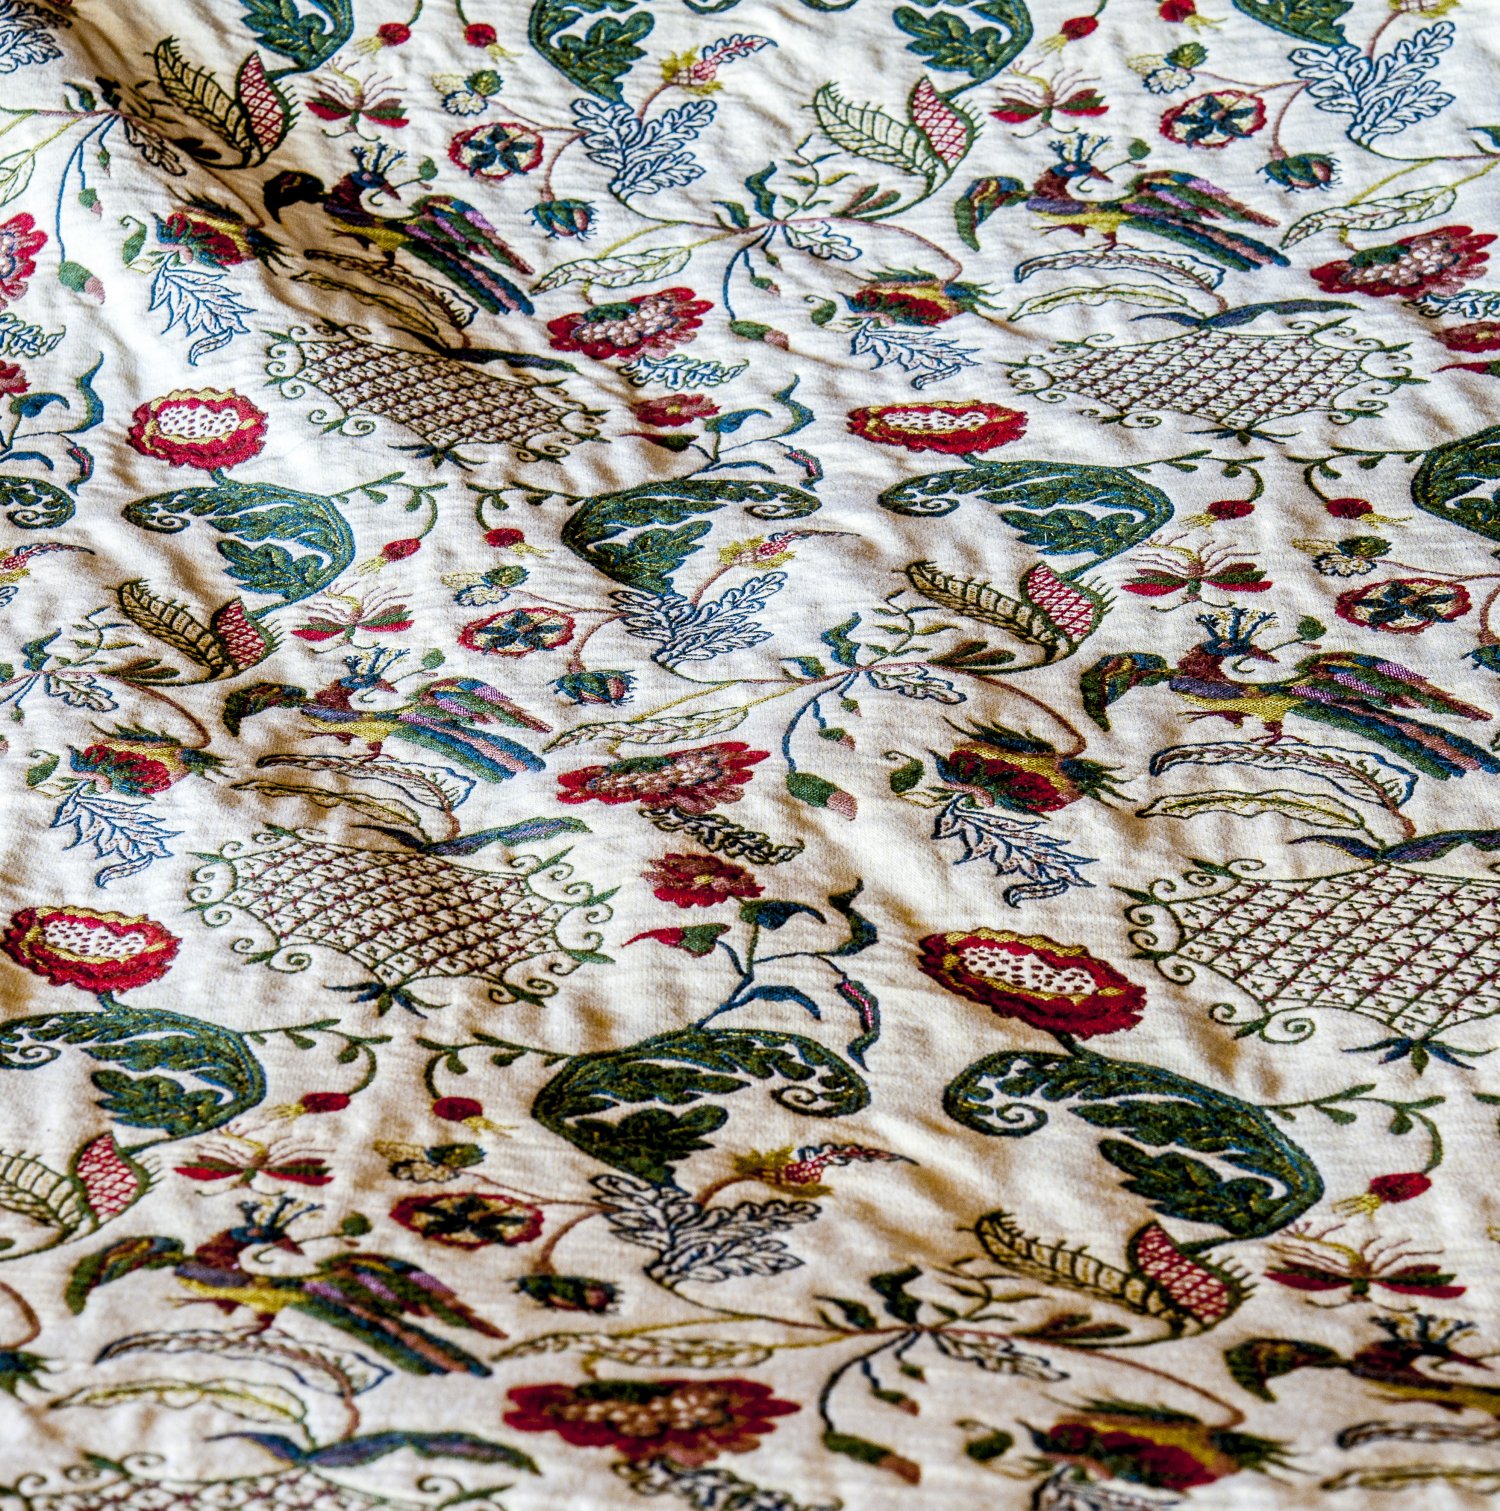 Bedspread in 'English Needlework', inspired by original designs from the 18th century